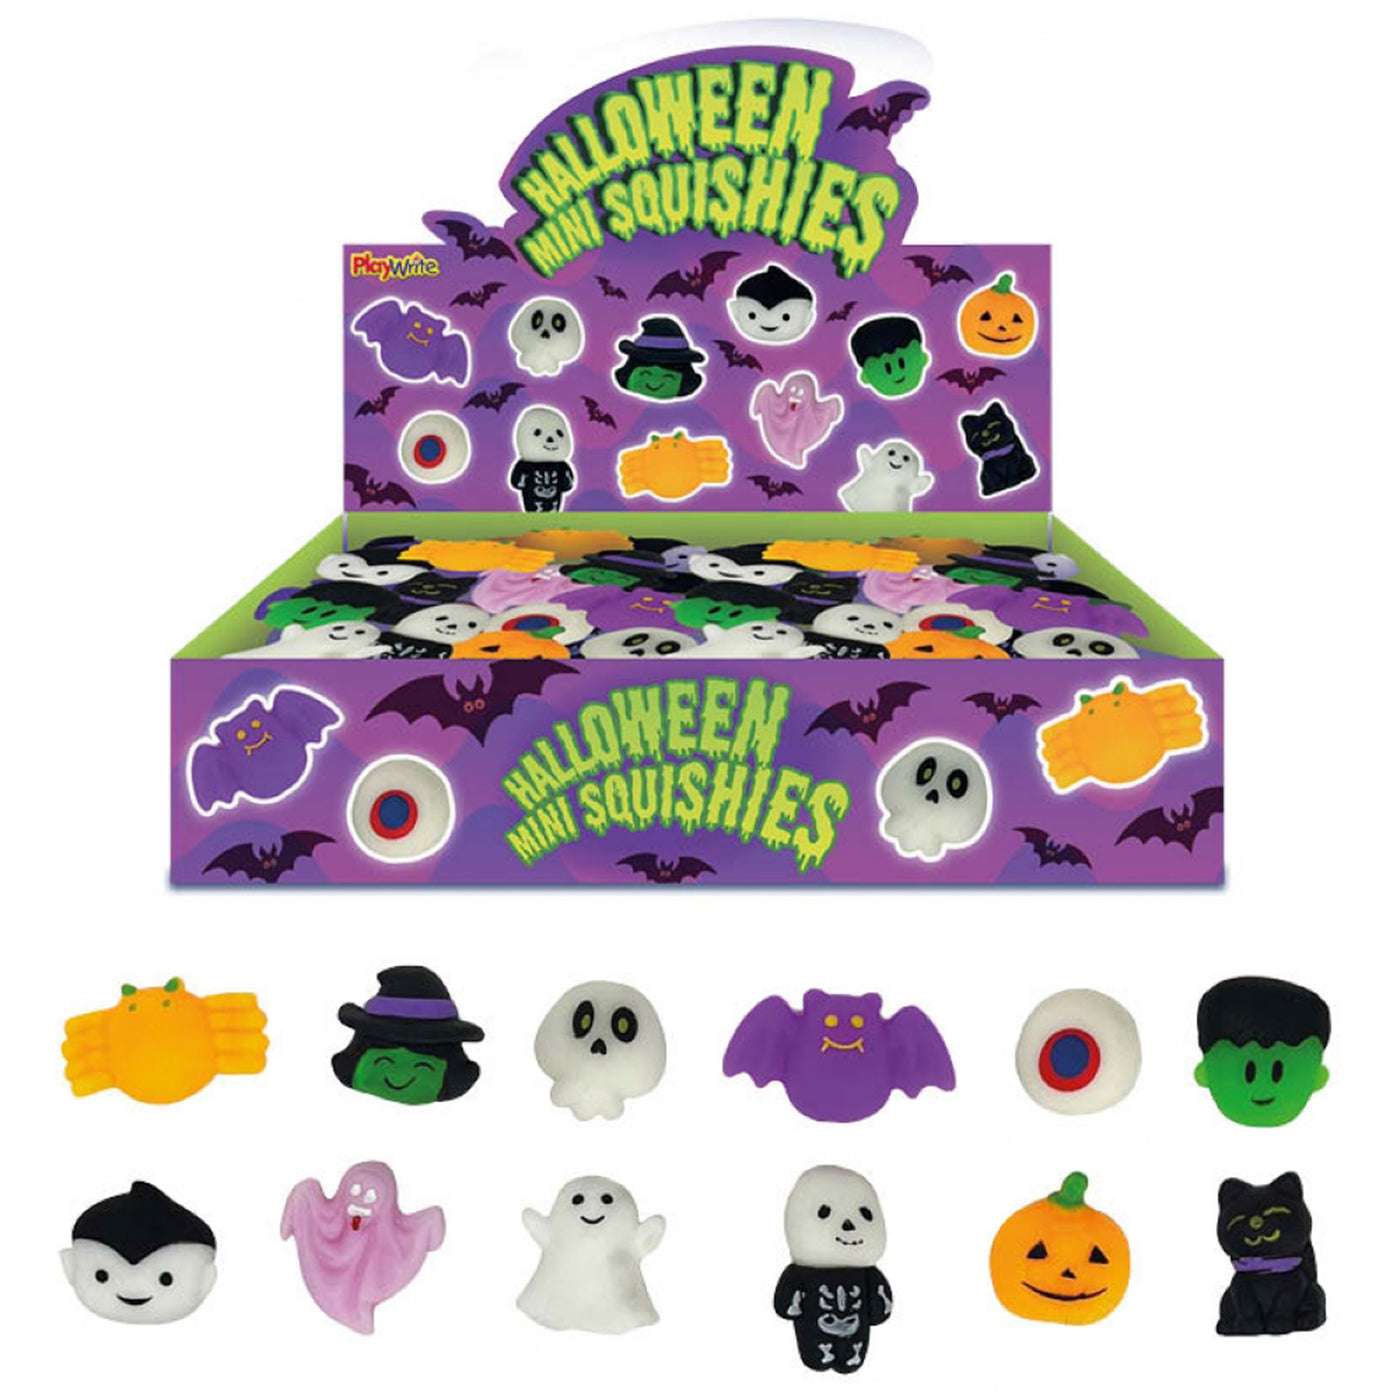 Halloween Party Favours For Children With Toys And Sweets.